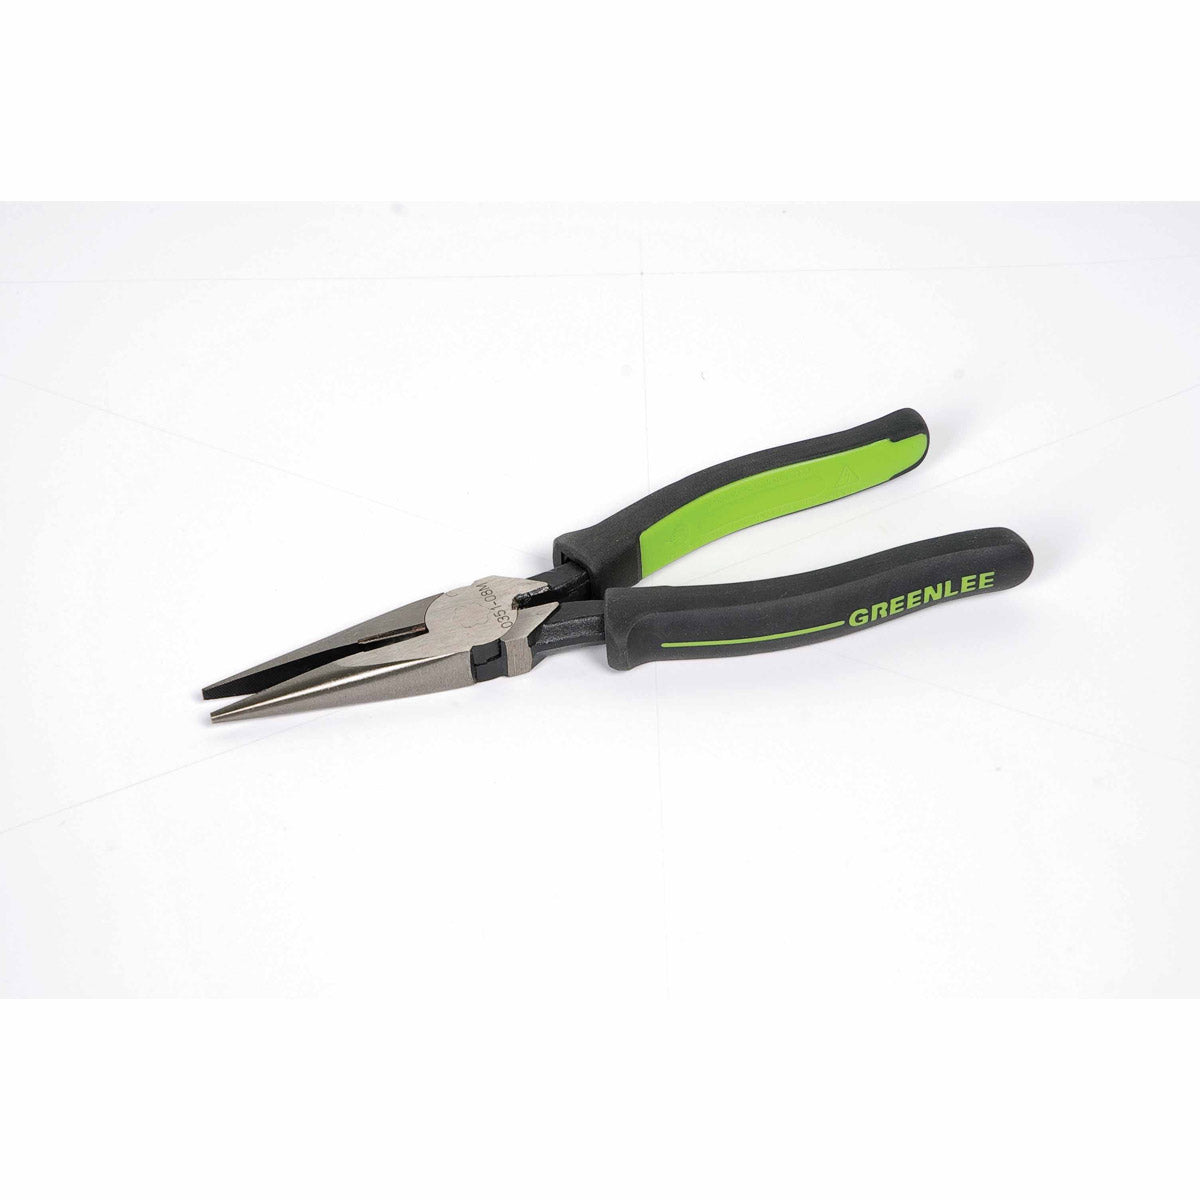 Greenlee 0351-06M Long Nose Pliers/Side Cutting 6" Molded Grip